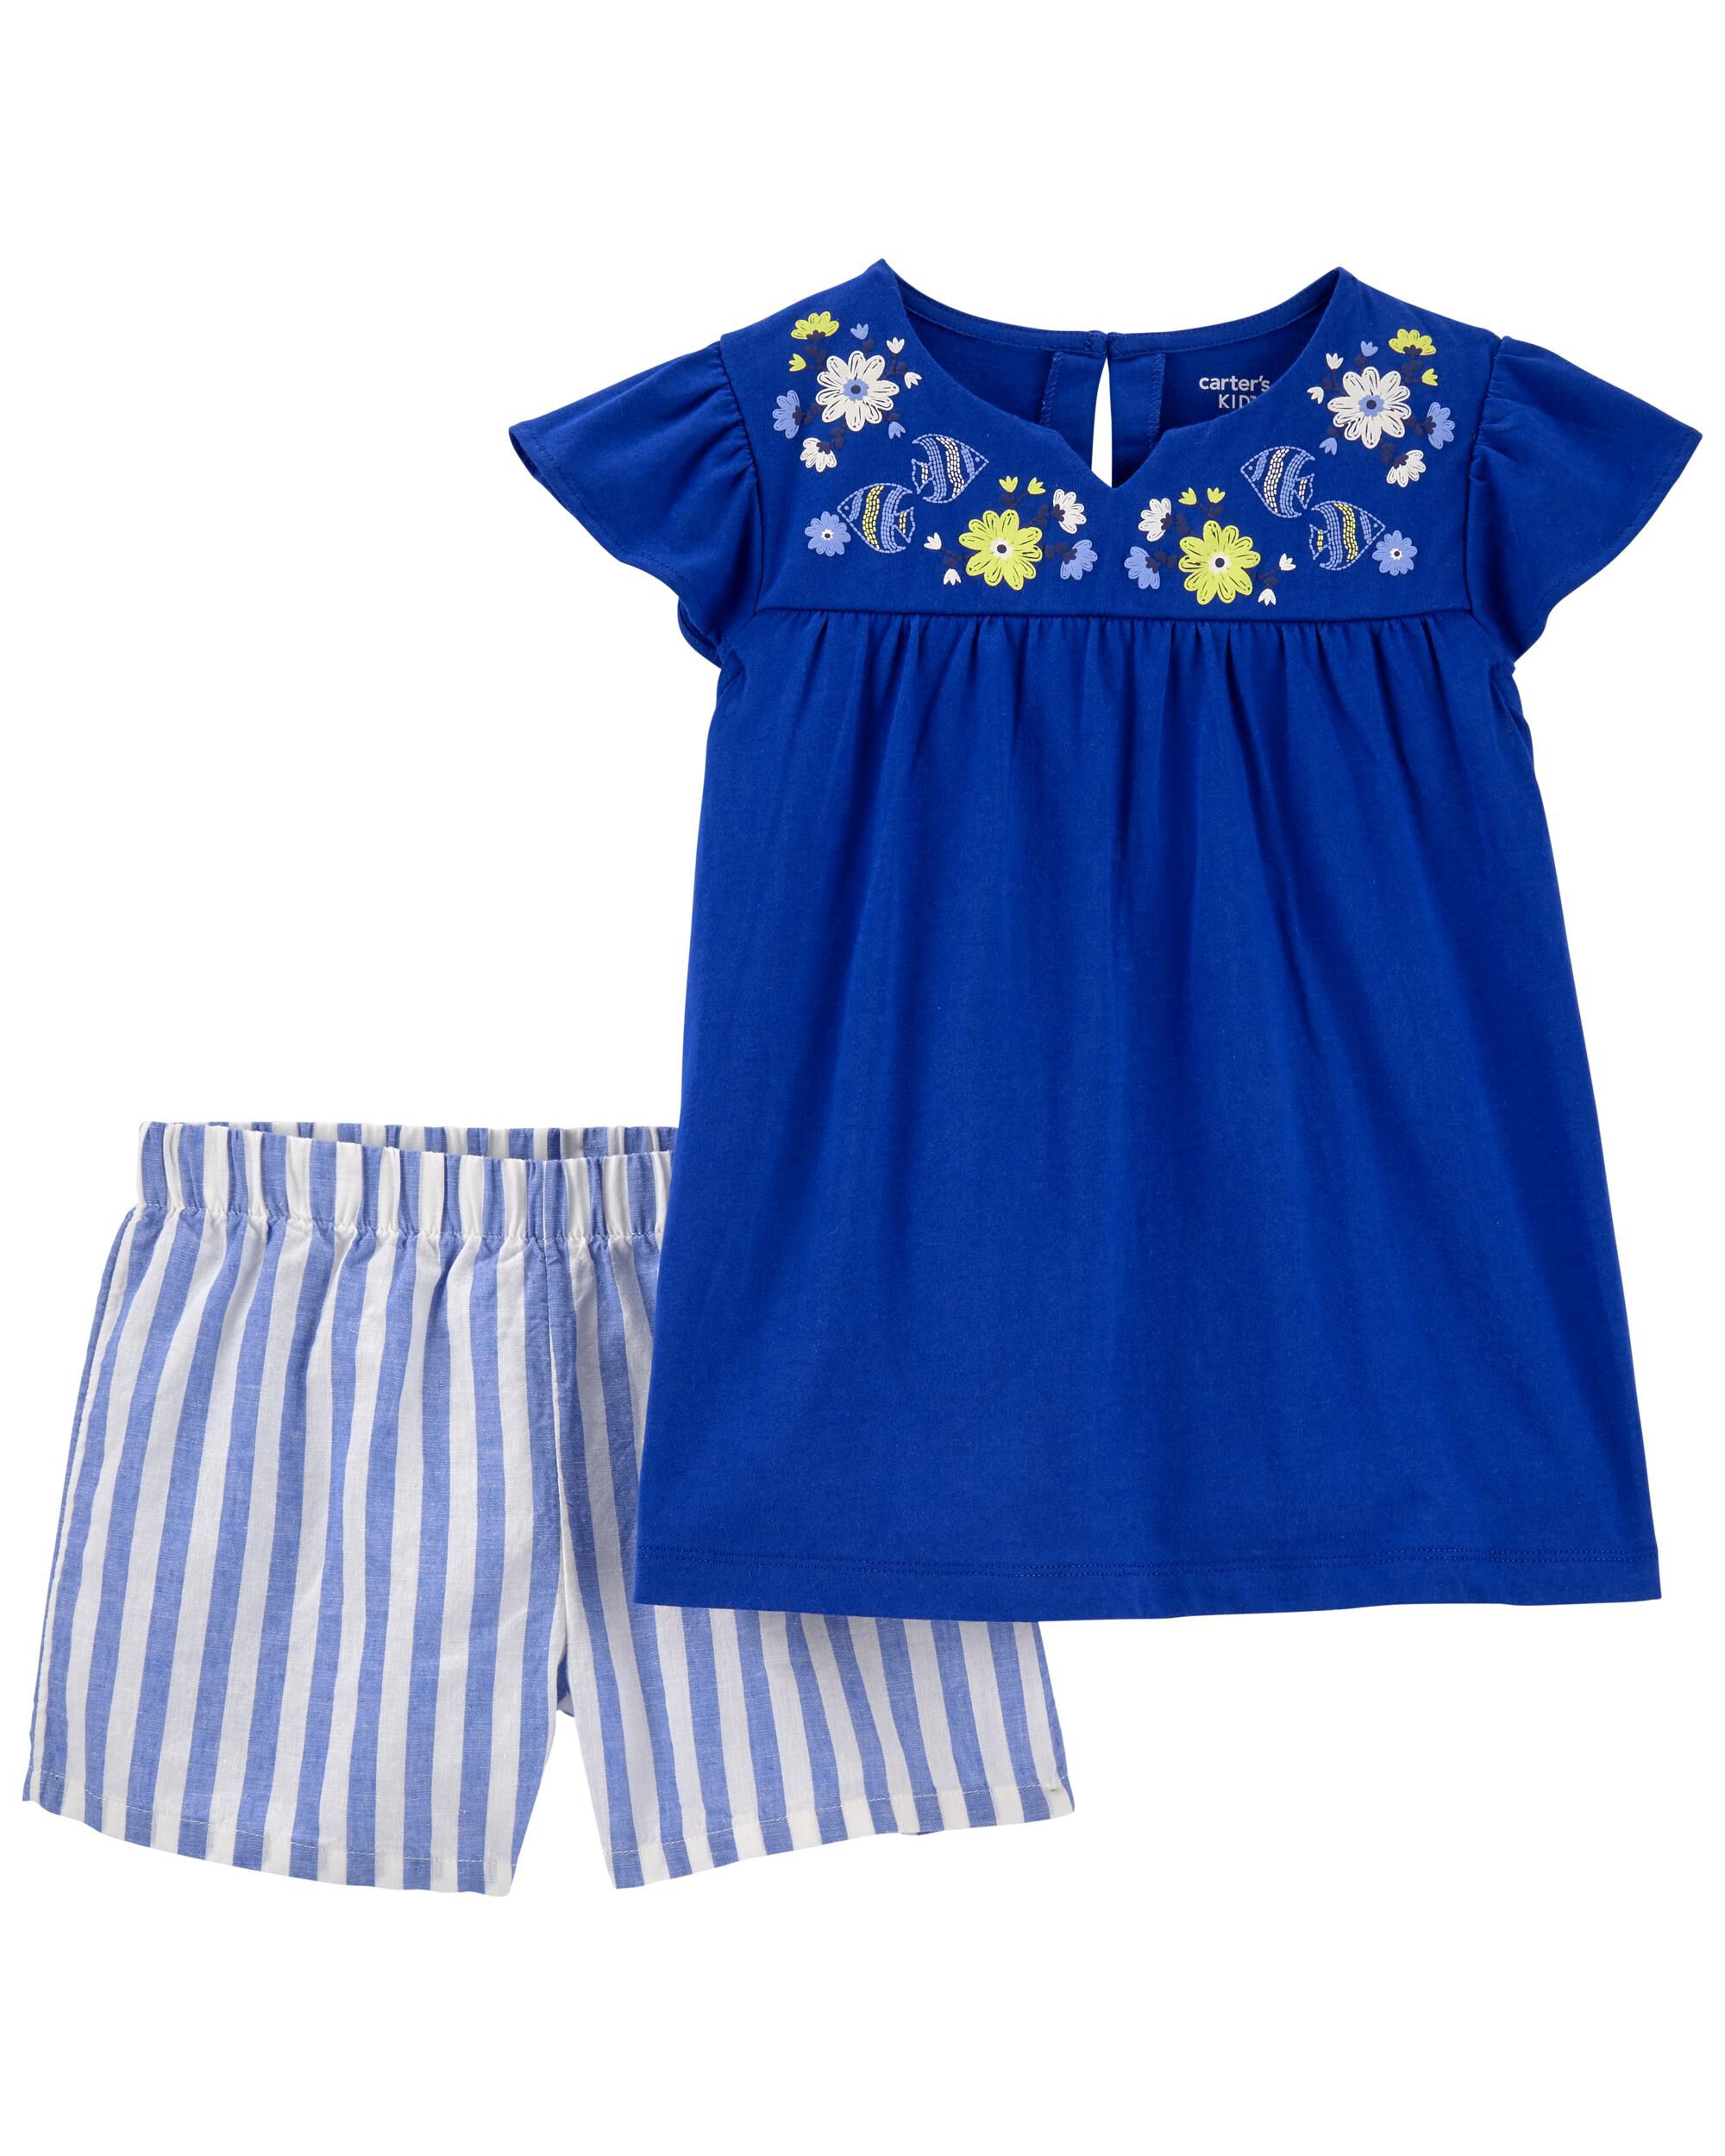 NEW CARTERS GIRLS 2 PIECE SET SHIRT & SHORTS OUTFIT VARIOUS STYLES & SIZES 